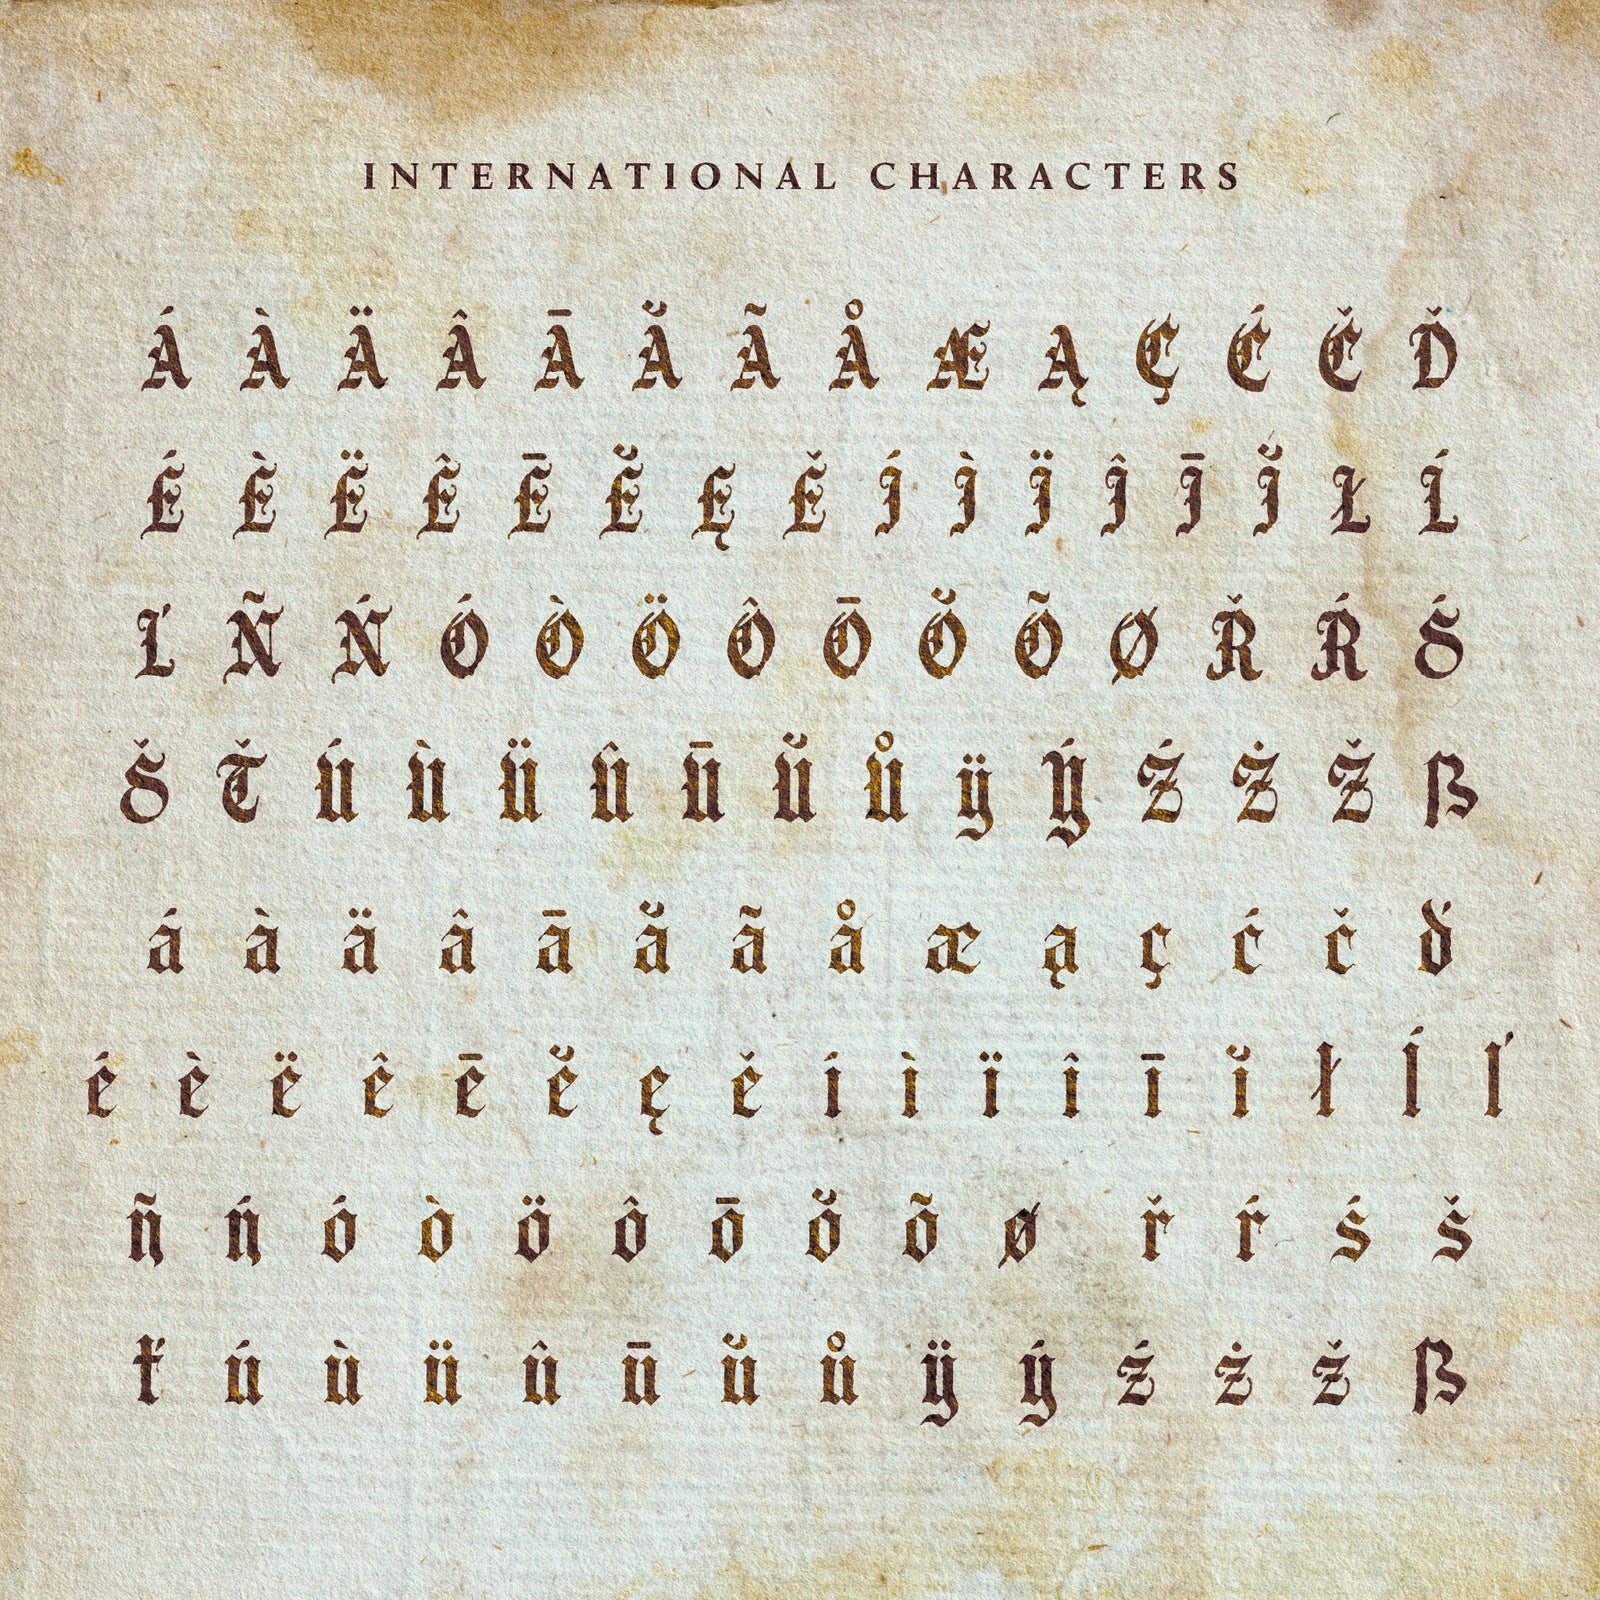 All non-english letter contained in the candelabra font set on an old paper texture